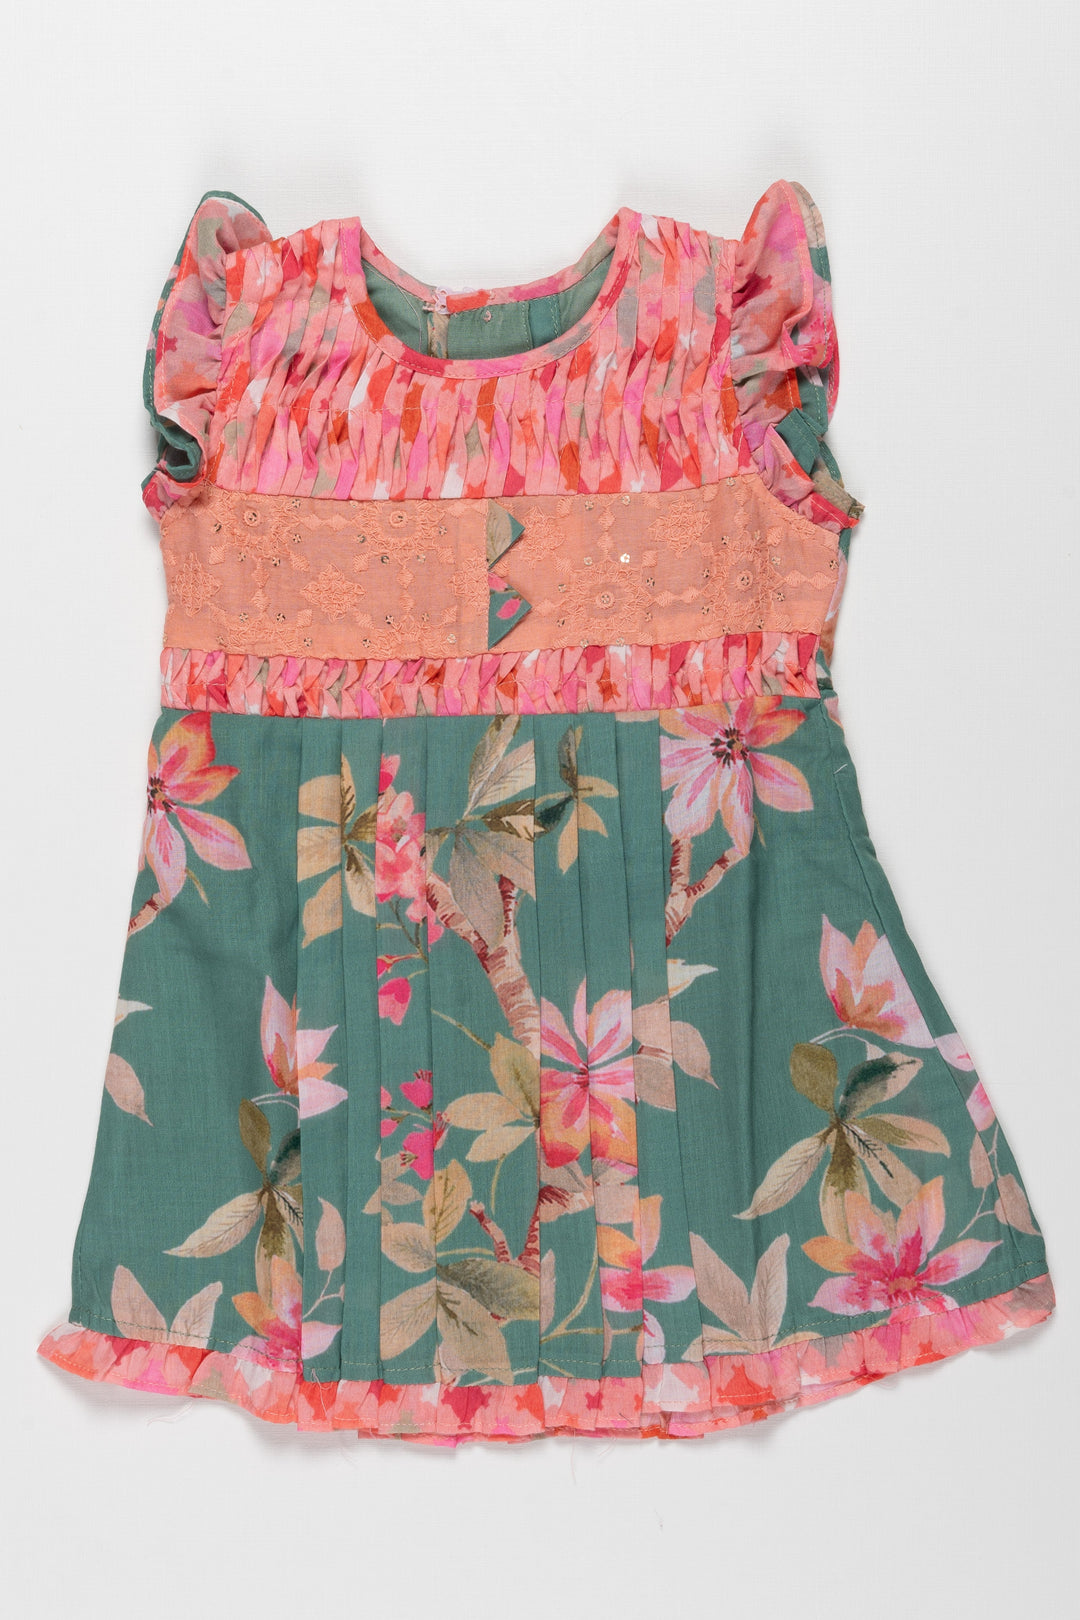 The Nesavu Baby Cotton Frocks Floral Print Cotton Frock for Baby Girls - Vibrant Summer Dress Nesavu 14 (6M) / Green / Cotton BFJ555A-14 Buy Baby Girls Floral Cotton Frock | Summer Style for Little Girls | The Nesavu